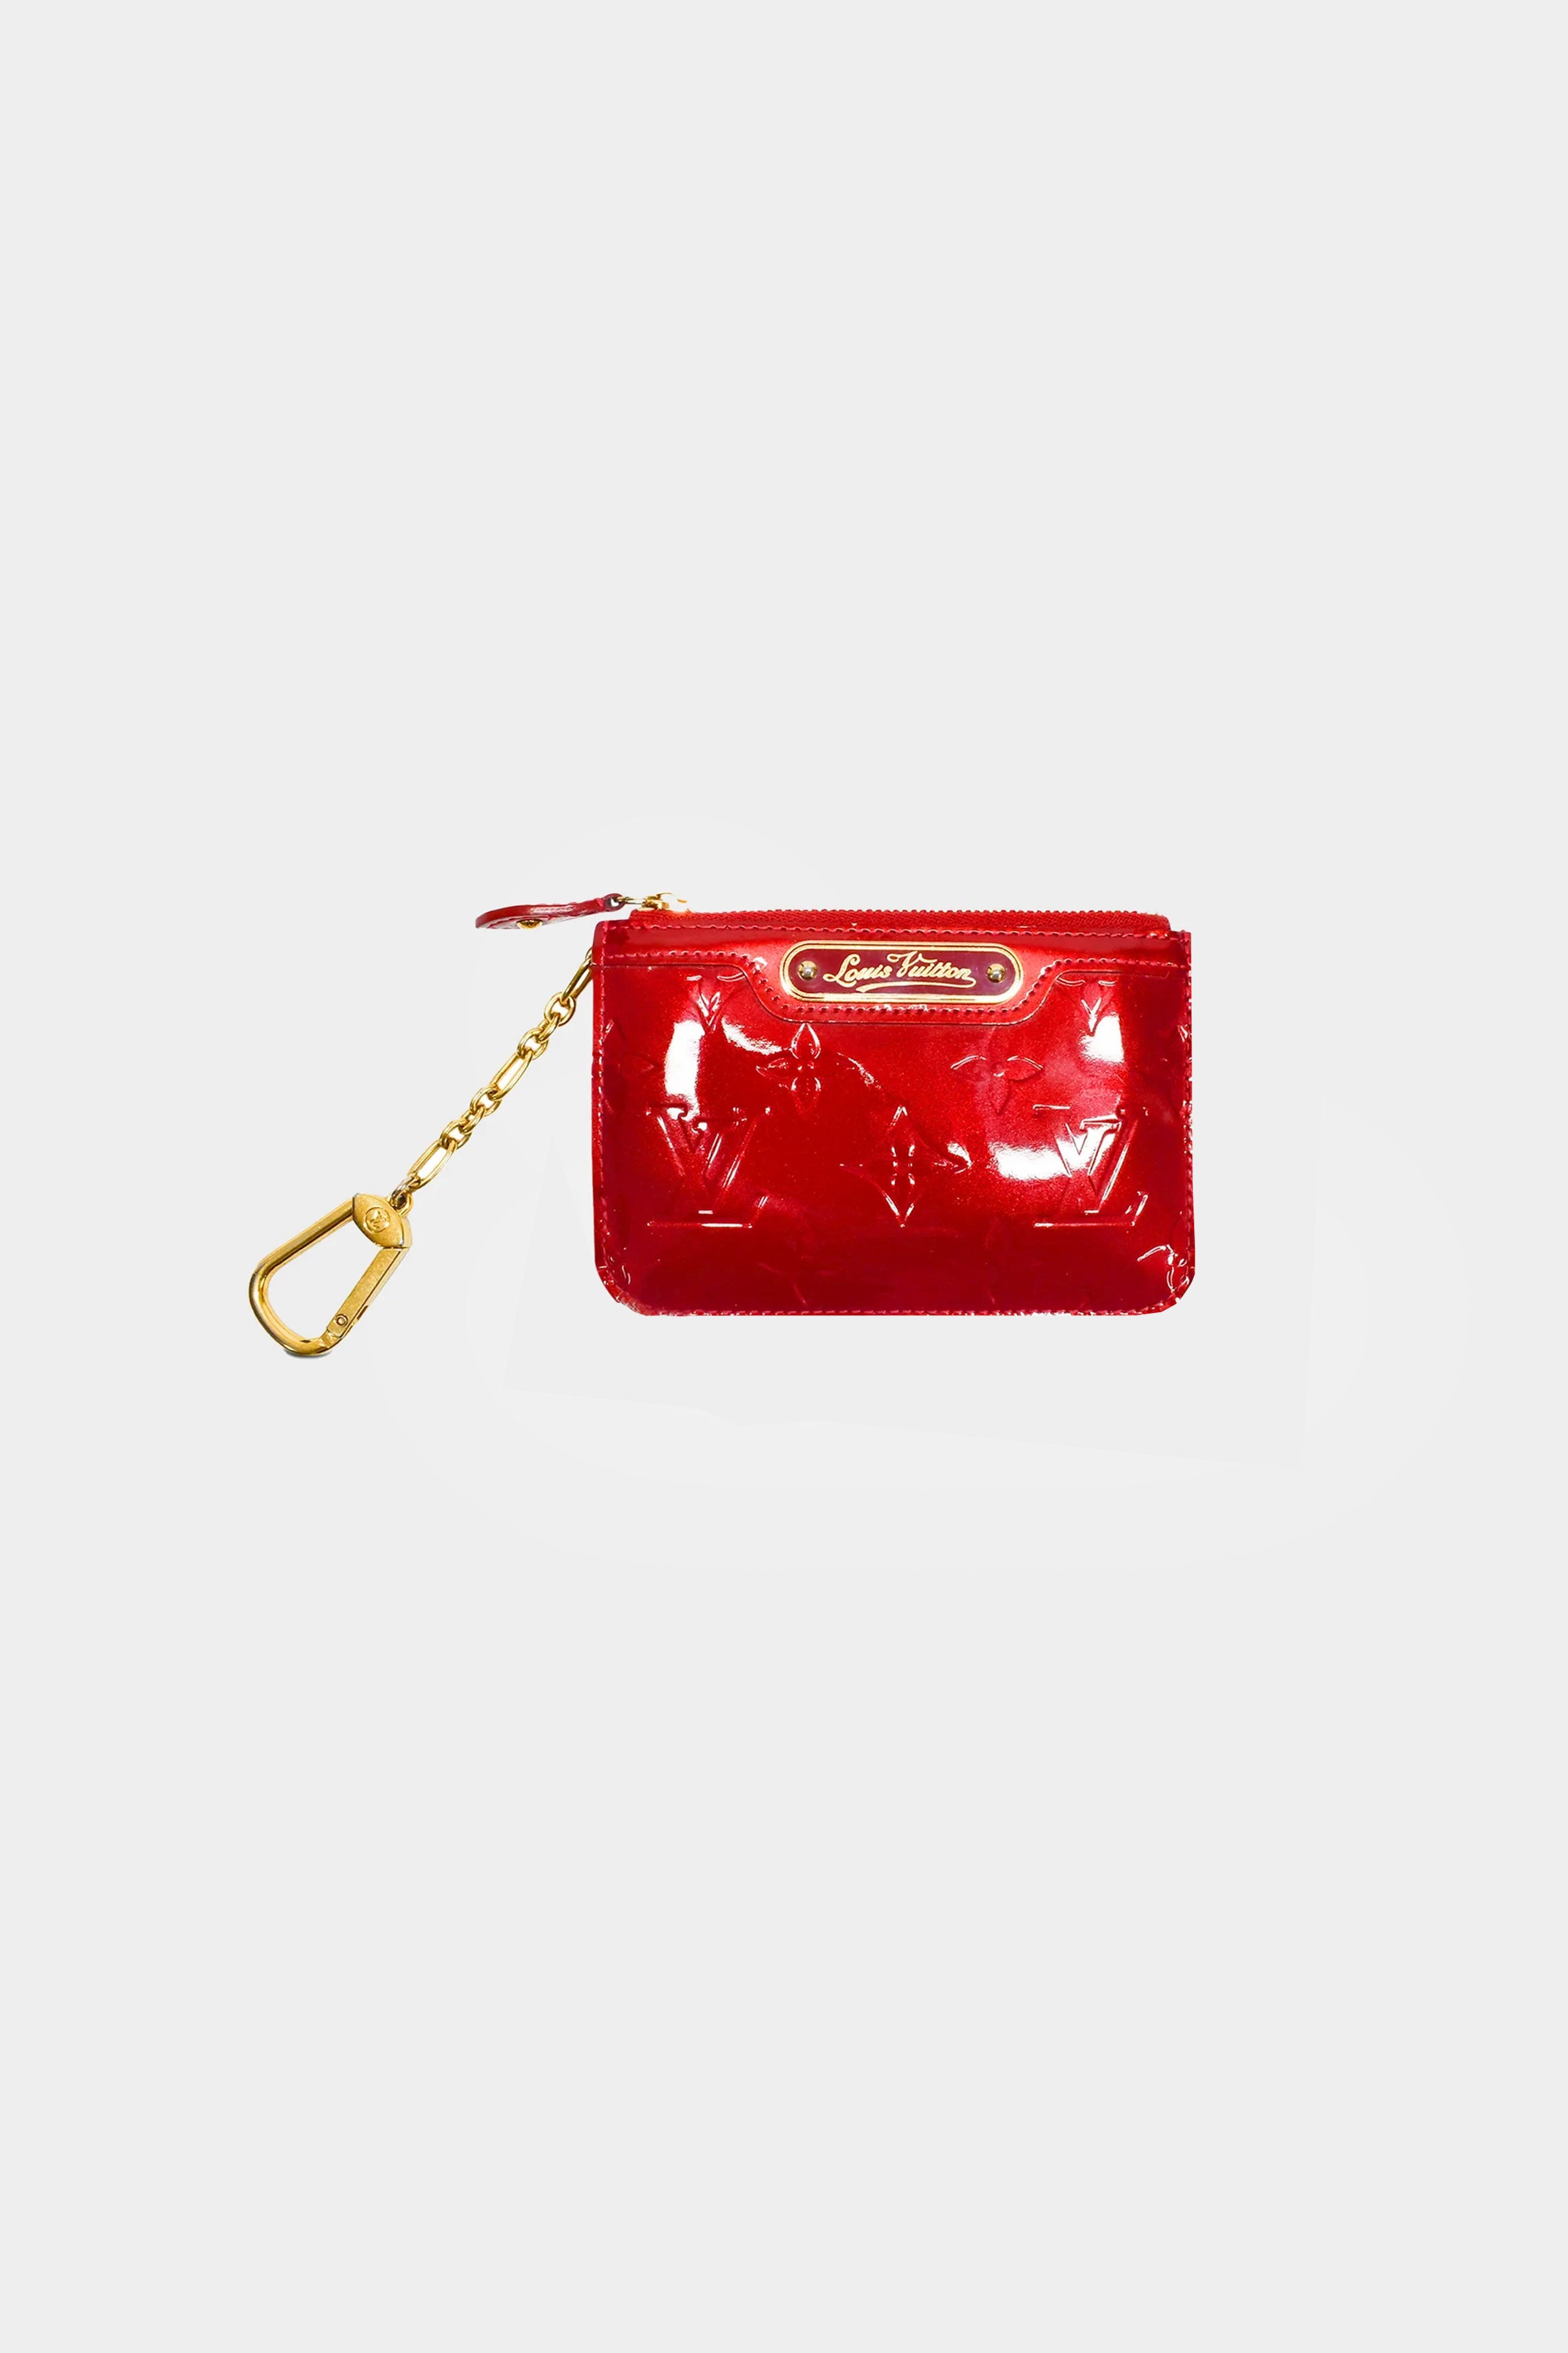 Louis Vuitton 2000s Red Vernis Key Chain · INTO